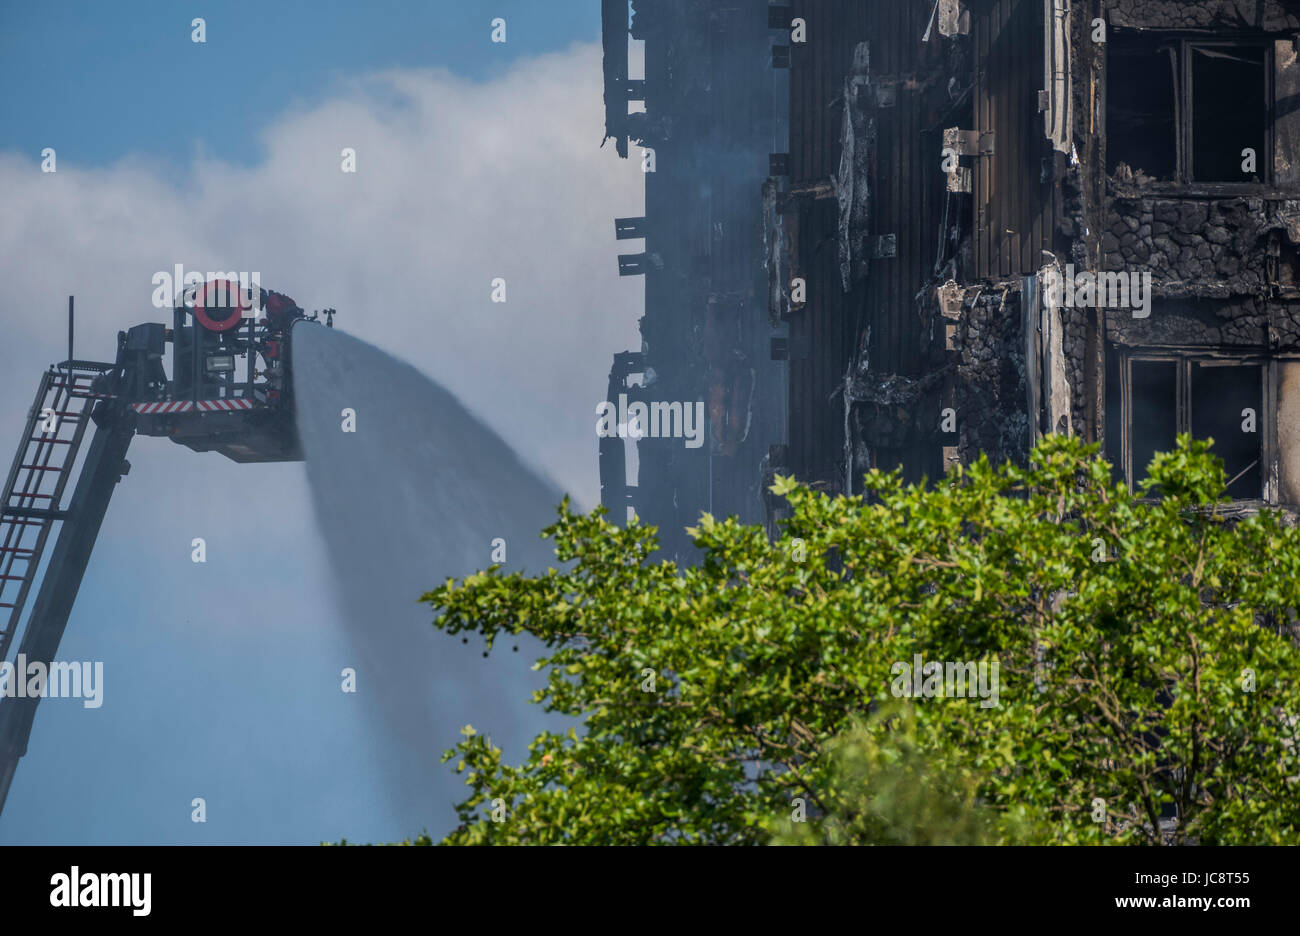 London, UK. 14th June, 2017. The fire service water jet hoses down the building but only reaches about half way up. Grenfell Tower - The charred remains of the tower block that caught fire last night in North Kensington near Latimer Road tube station. London 14 June 2017. Credit: Guy Bell/Alamy Live News Stock Photo